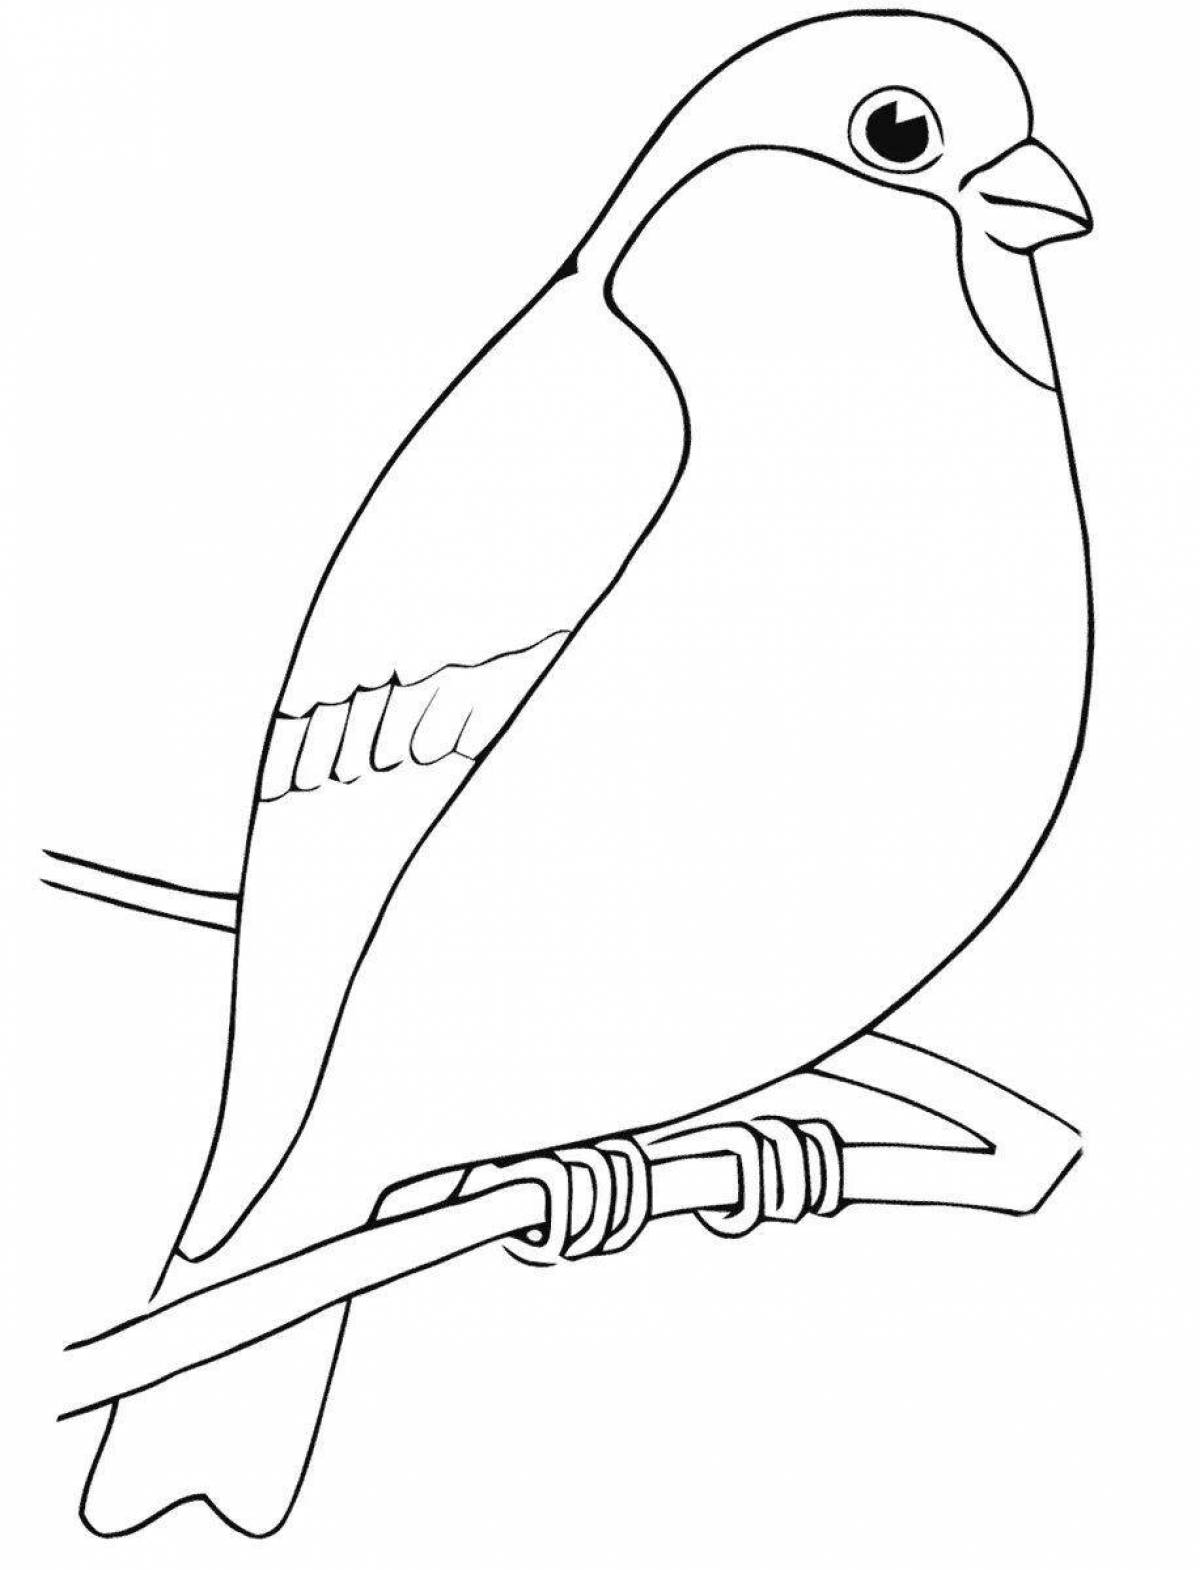 Cute drawing of a bullfinch for kids